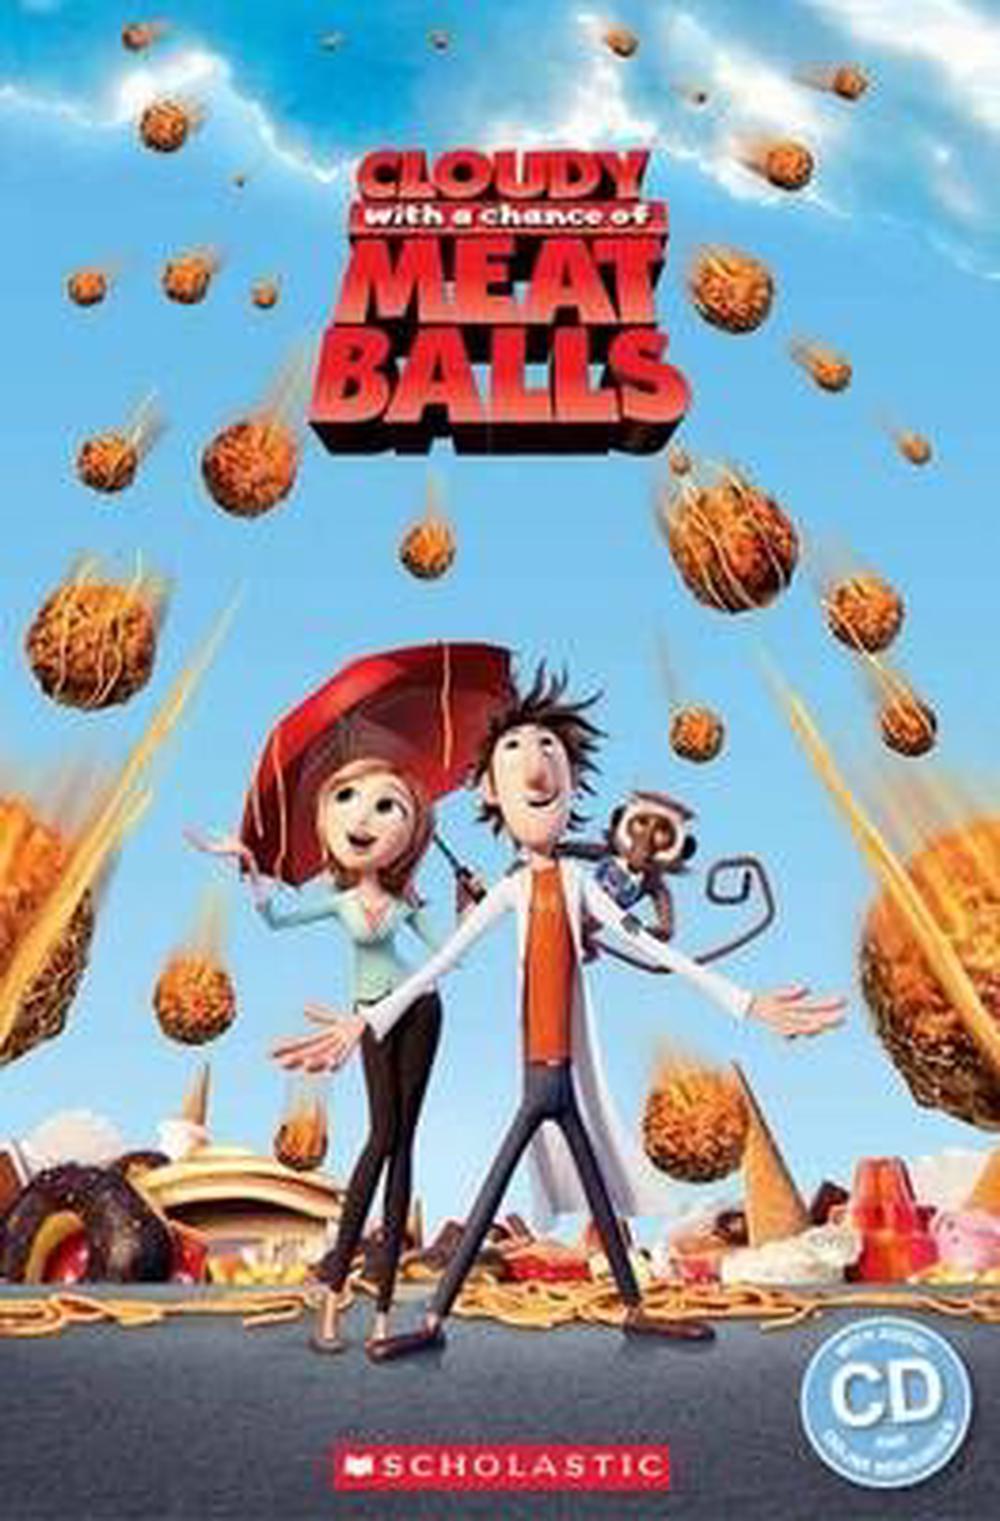 cloudy and the chance of meatballs book